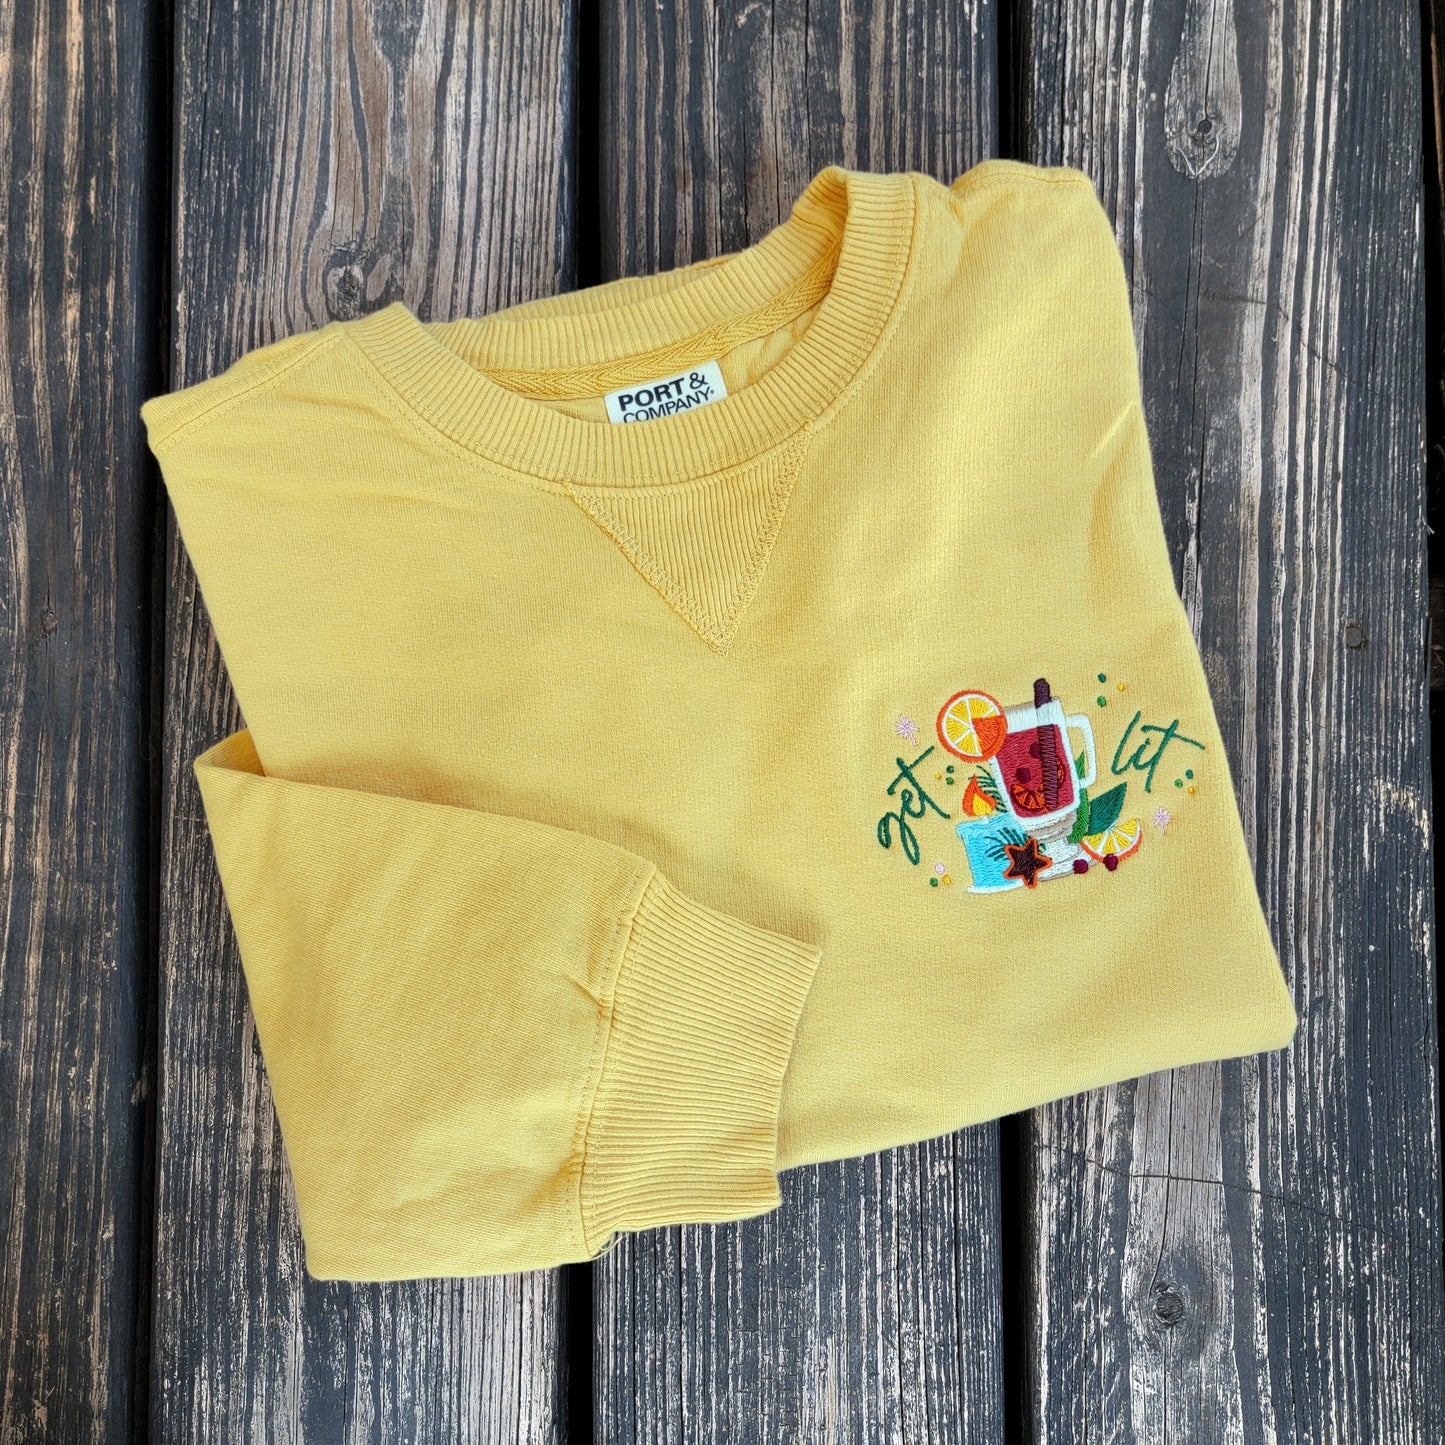 Cider, Spice, & All Things Nice - Embroidered Crewneck